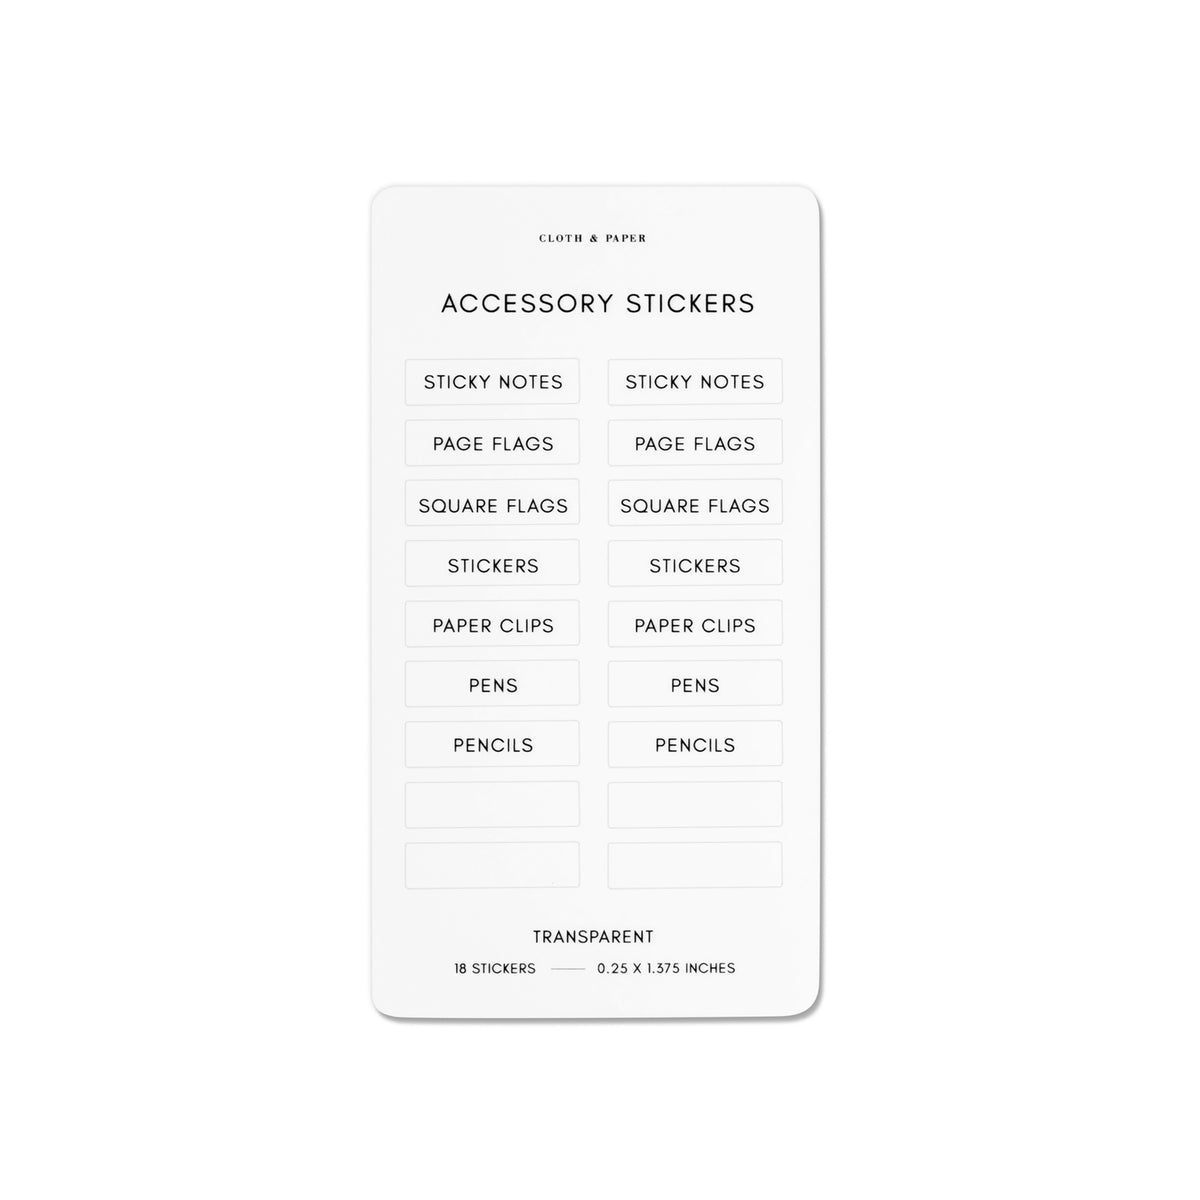 The Accessory File's  Page